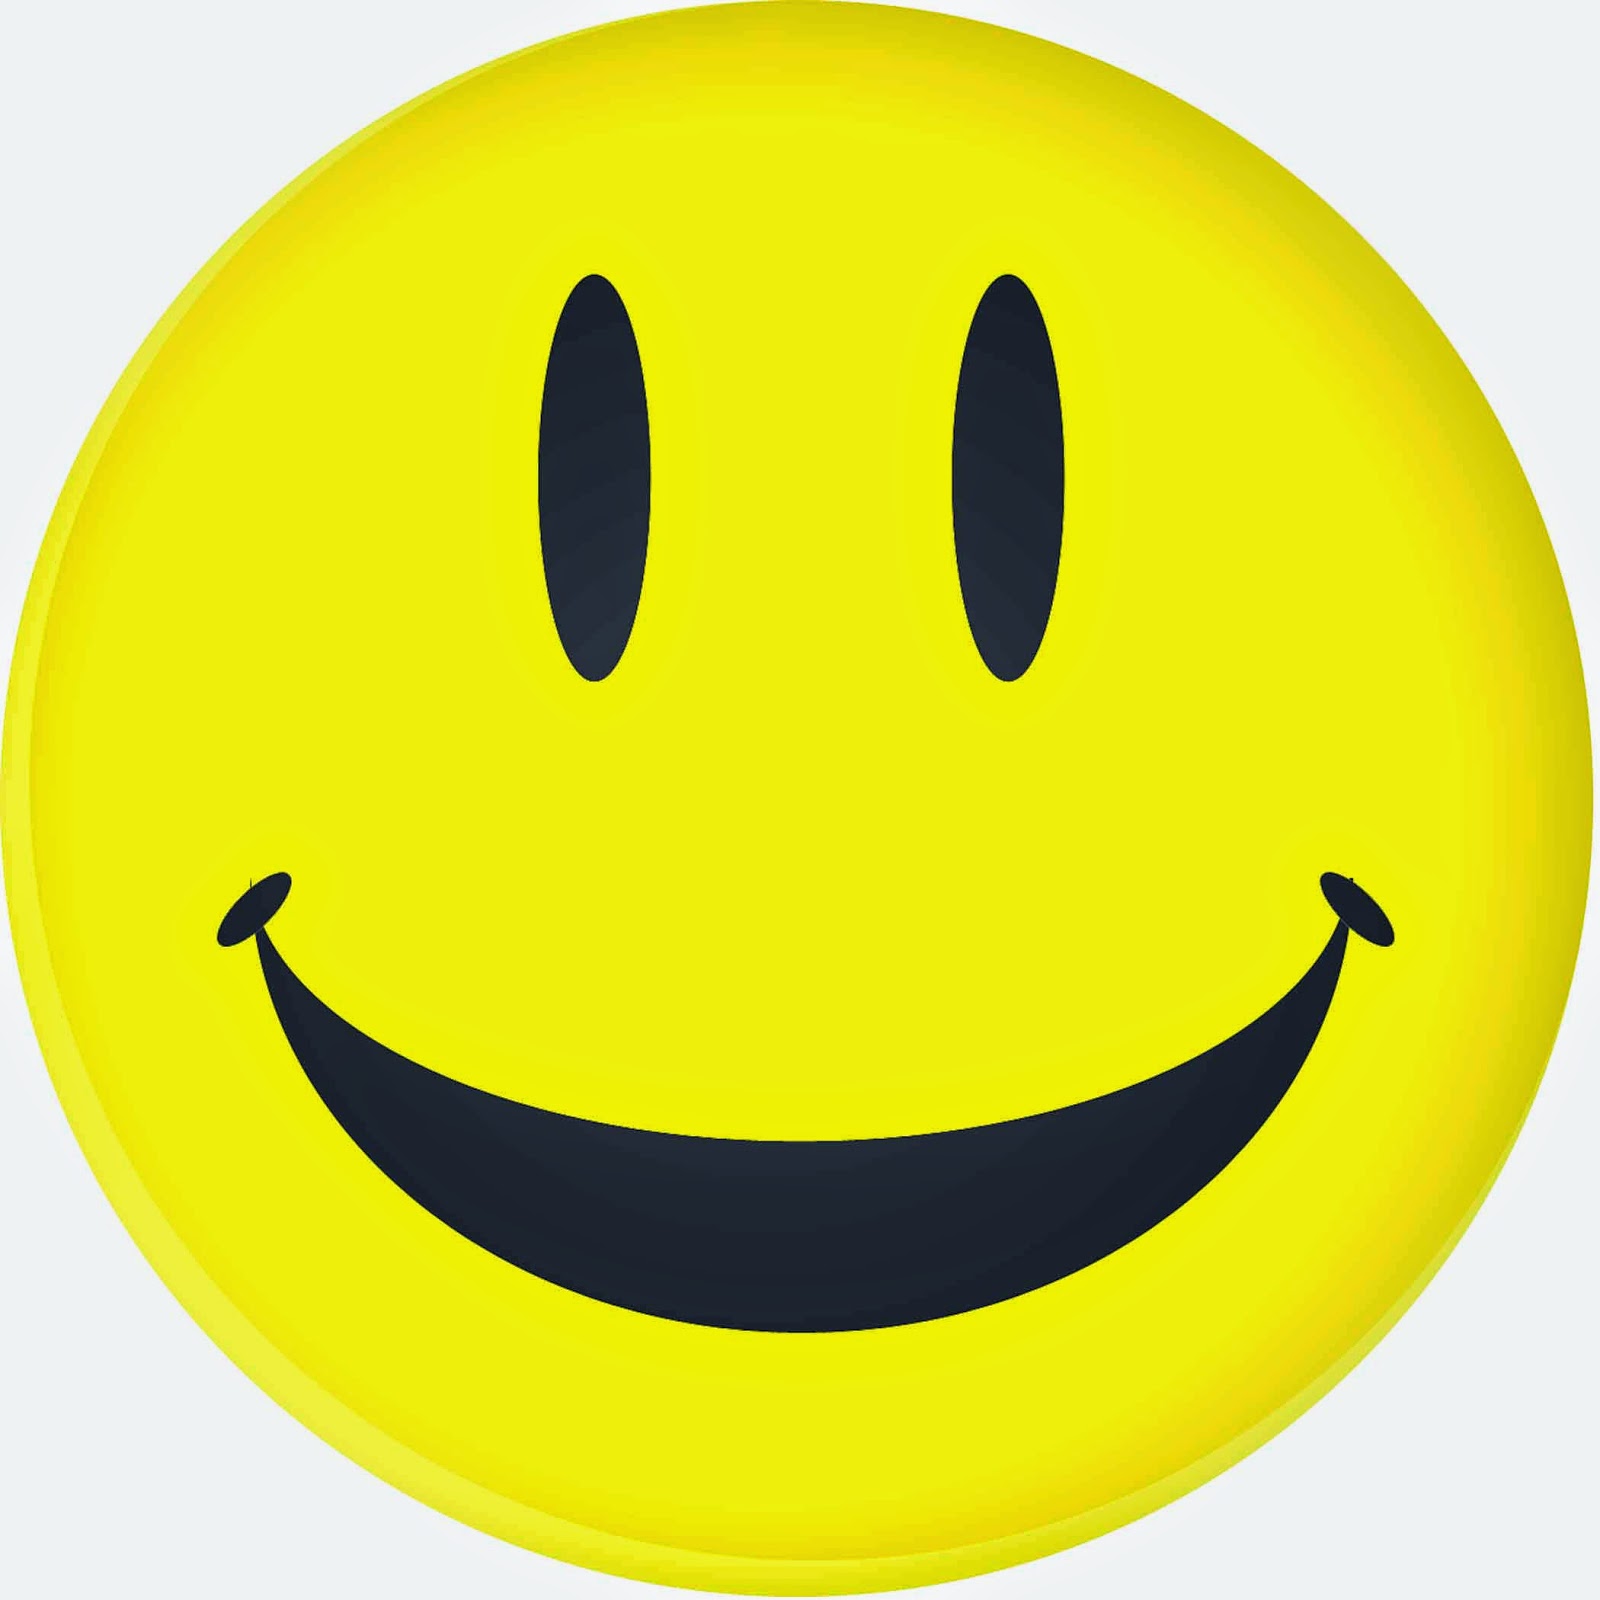 Smile Animation Clipart